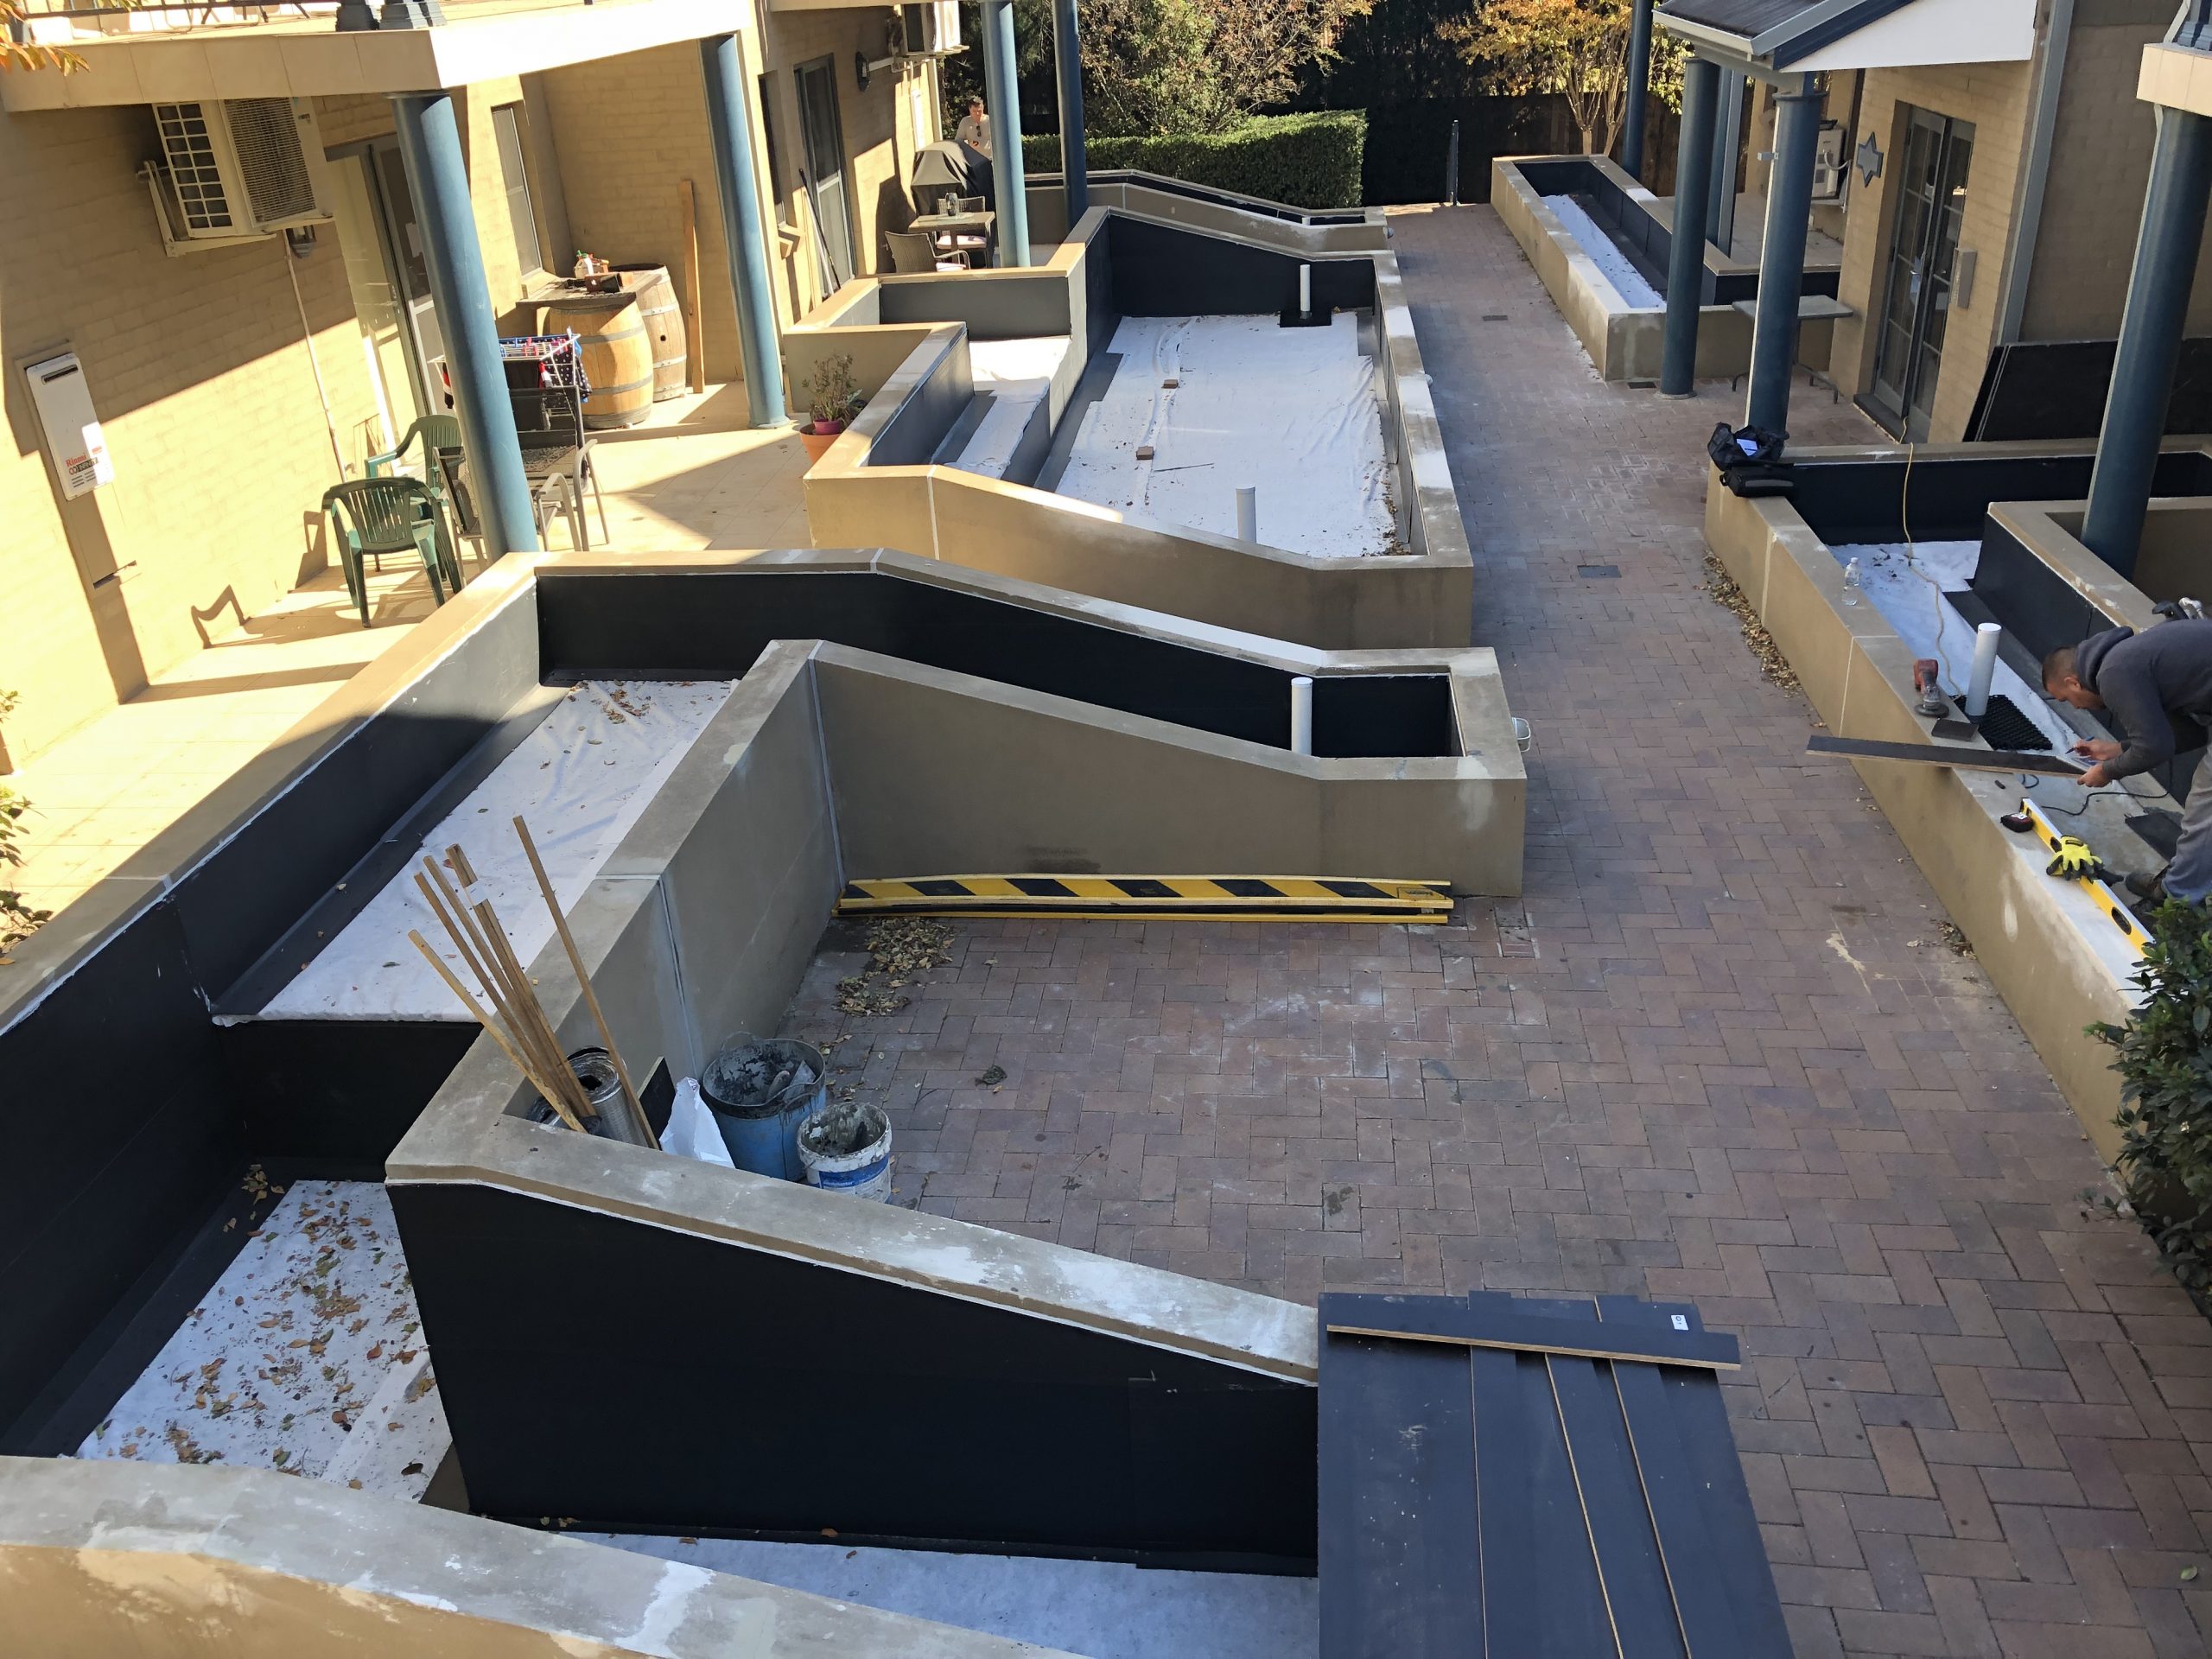 Strata Engineering Solutions - leaky basement fix and access improvement at Camden, NSW